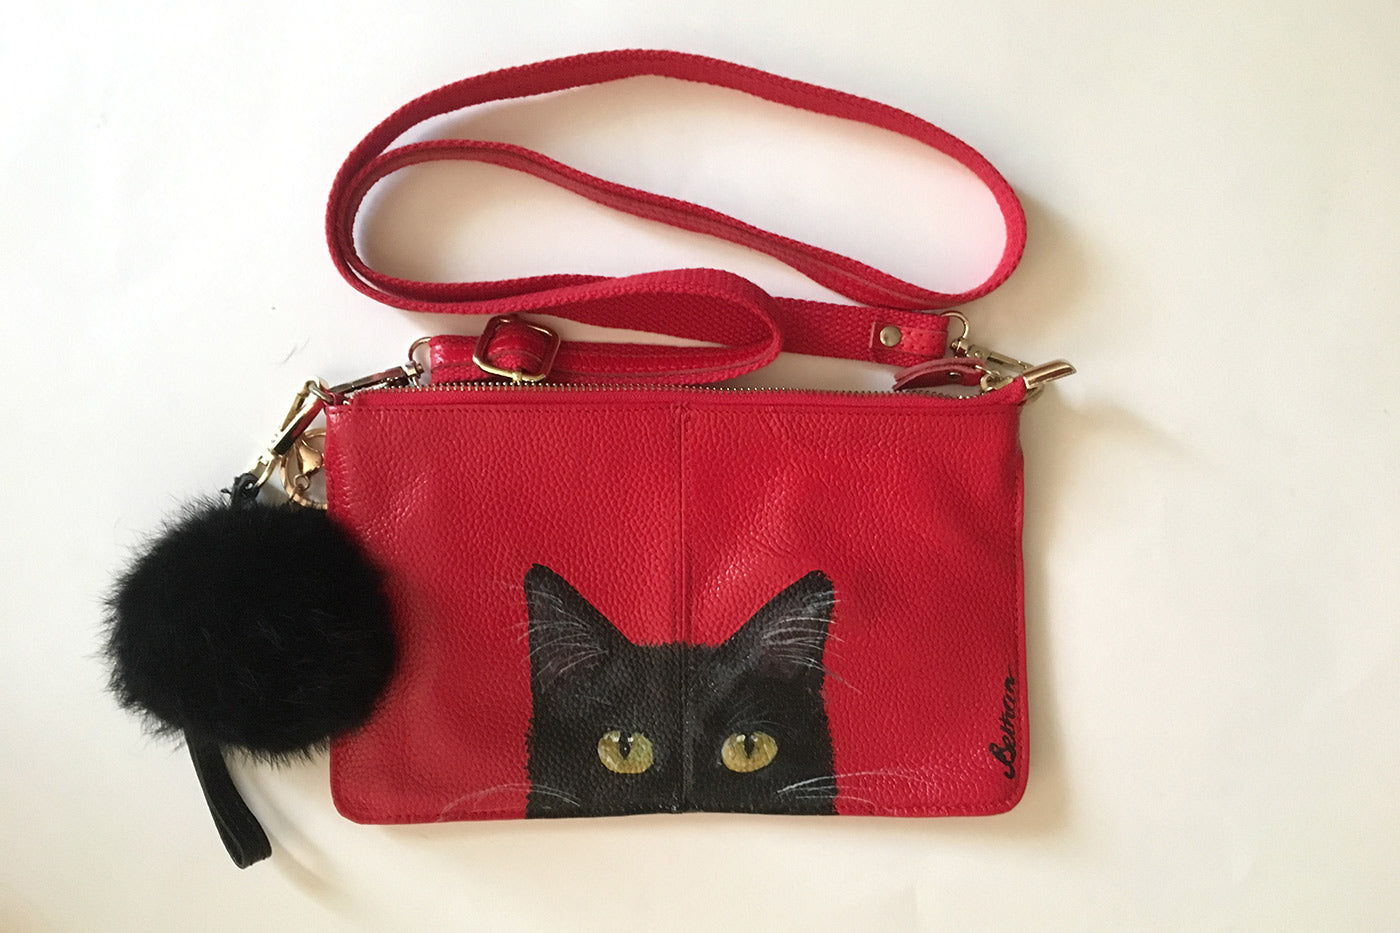 Hand-Painted Leather Cross Body Bag - Cats